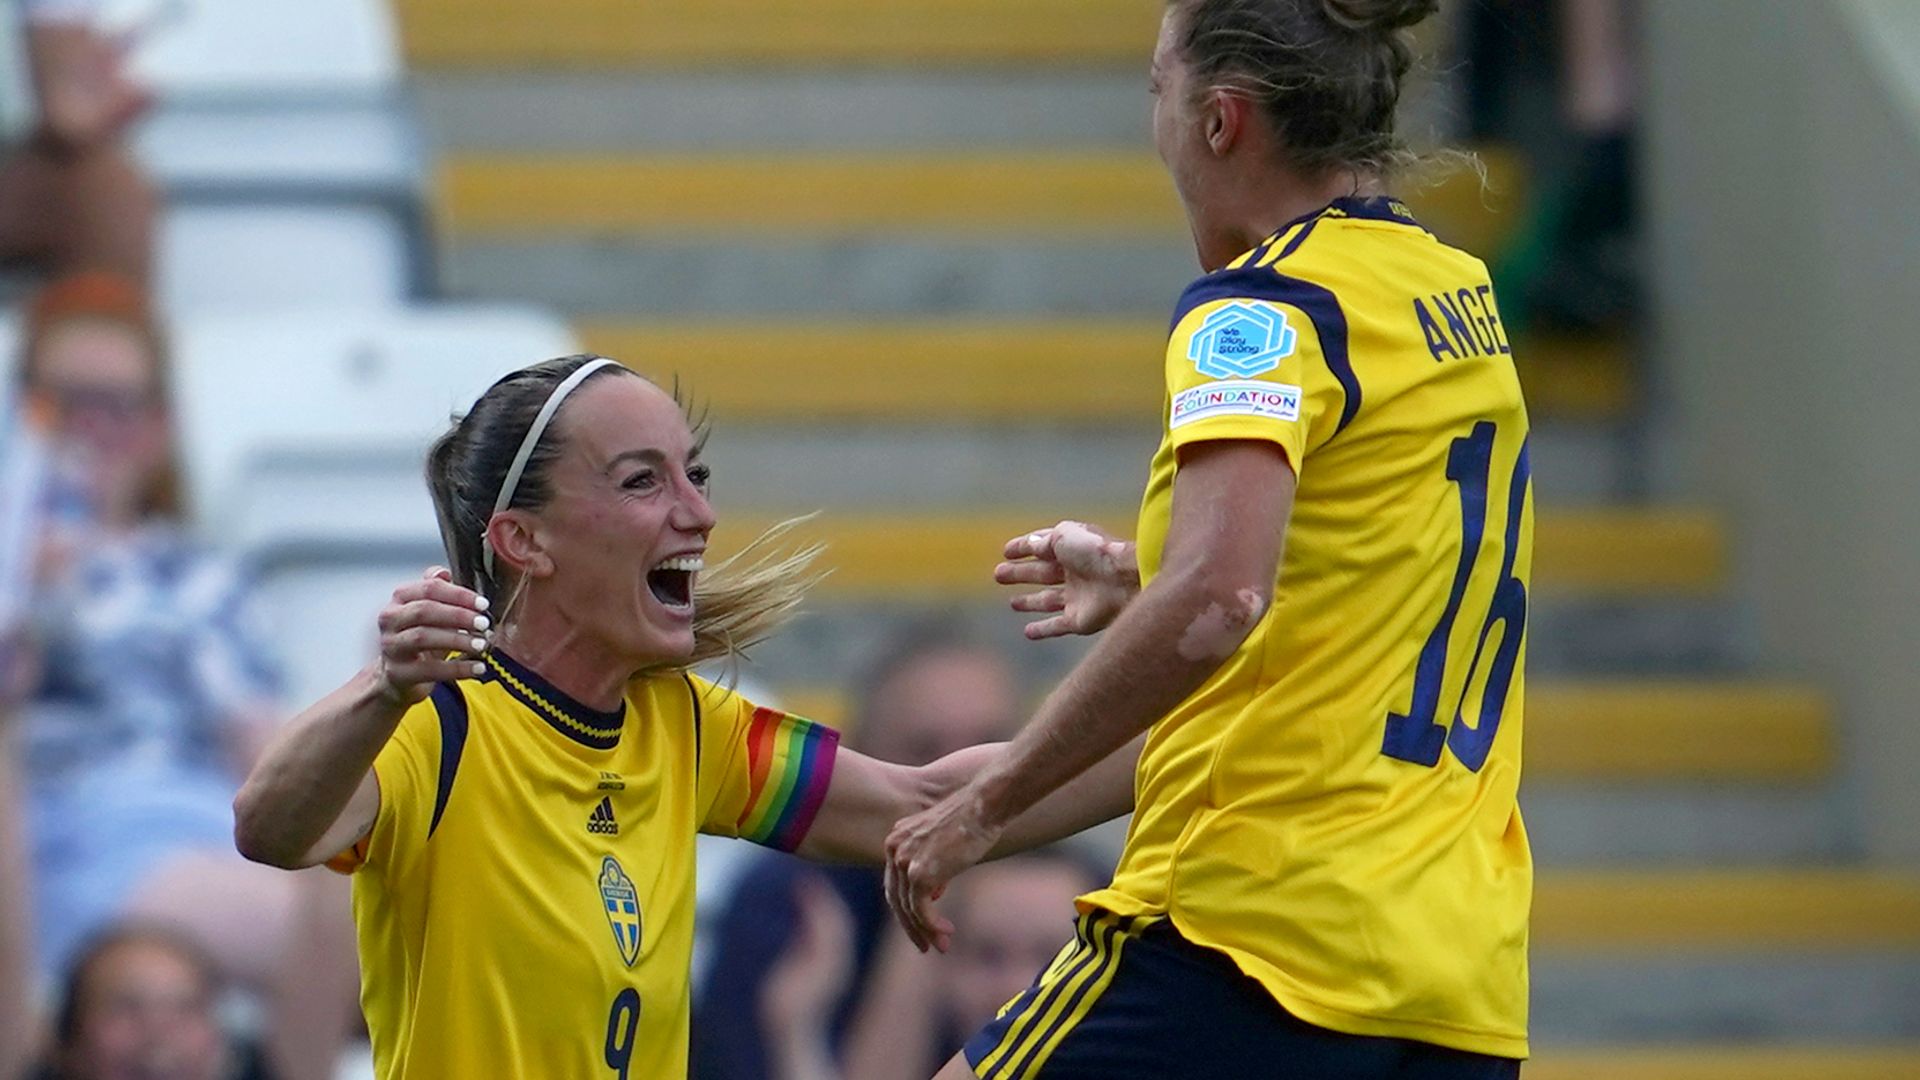 Sweden 5-0 Portugal: Stunning victory keeps up Swedes’ perfect run of reaching knockouts